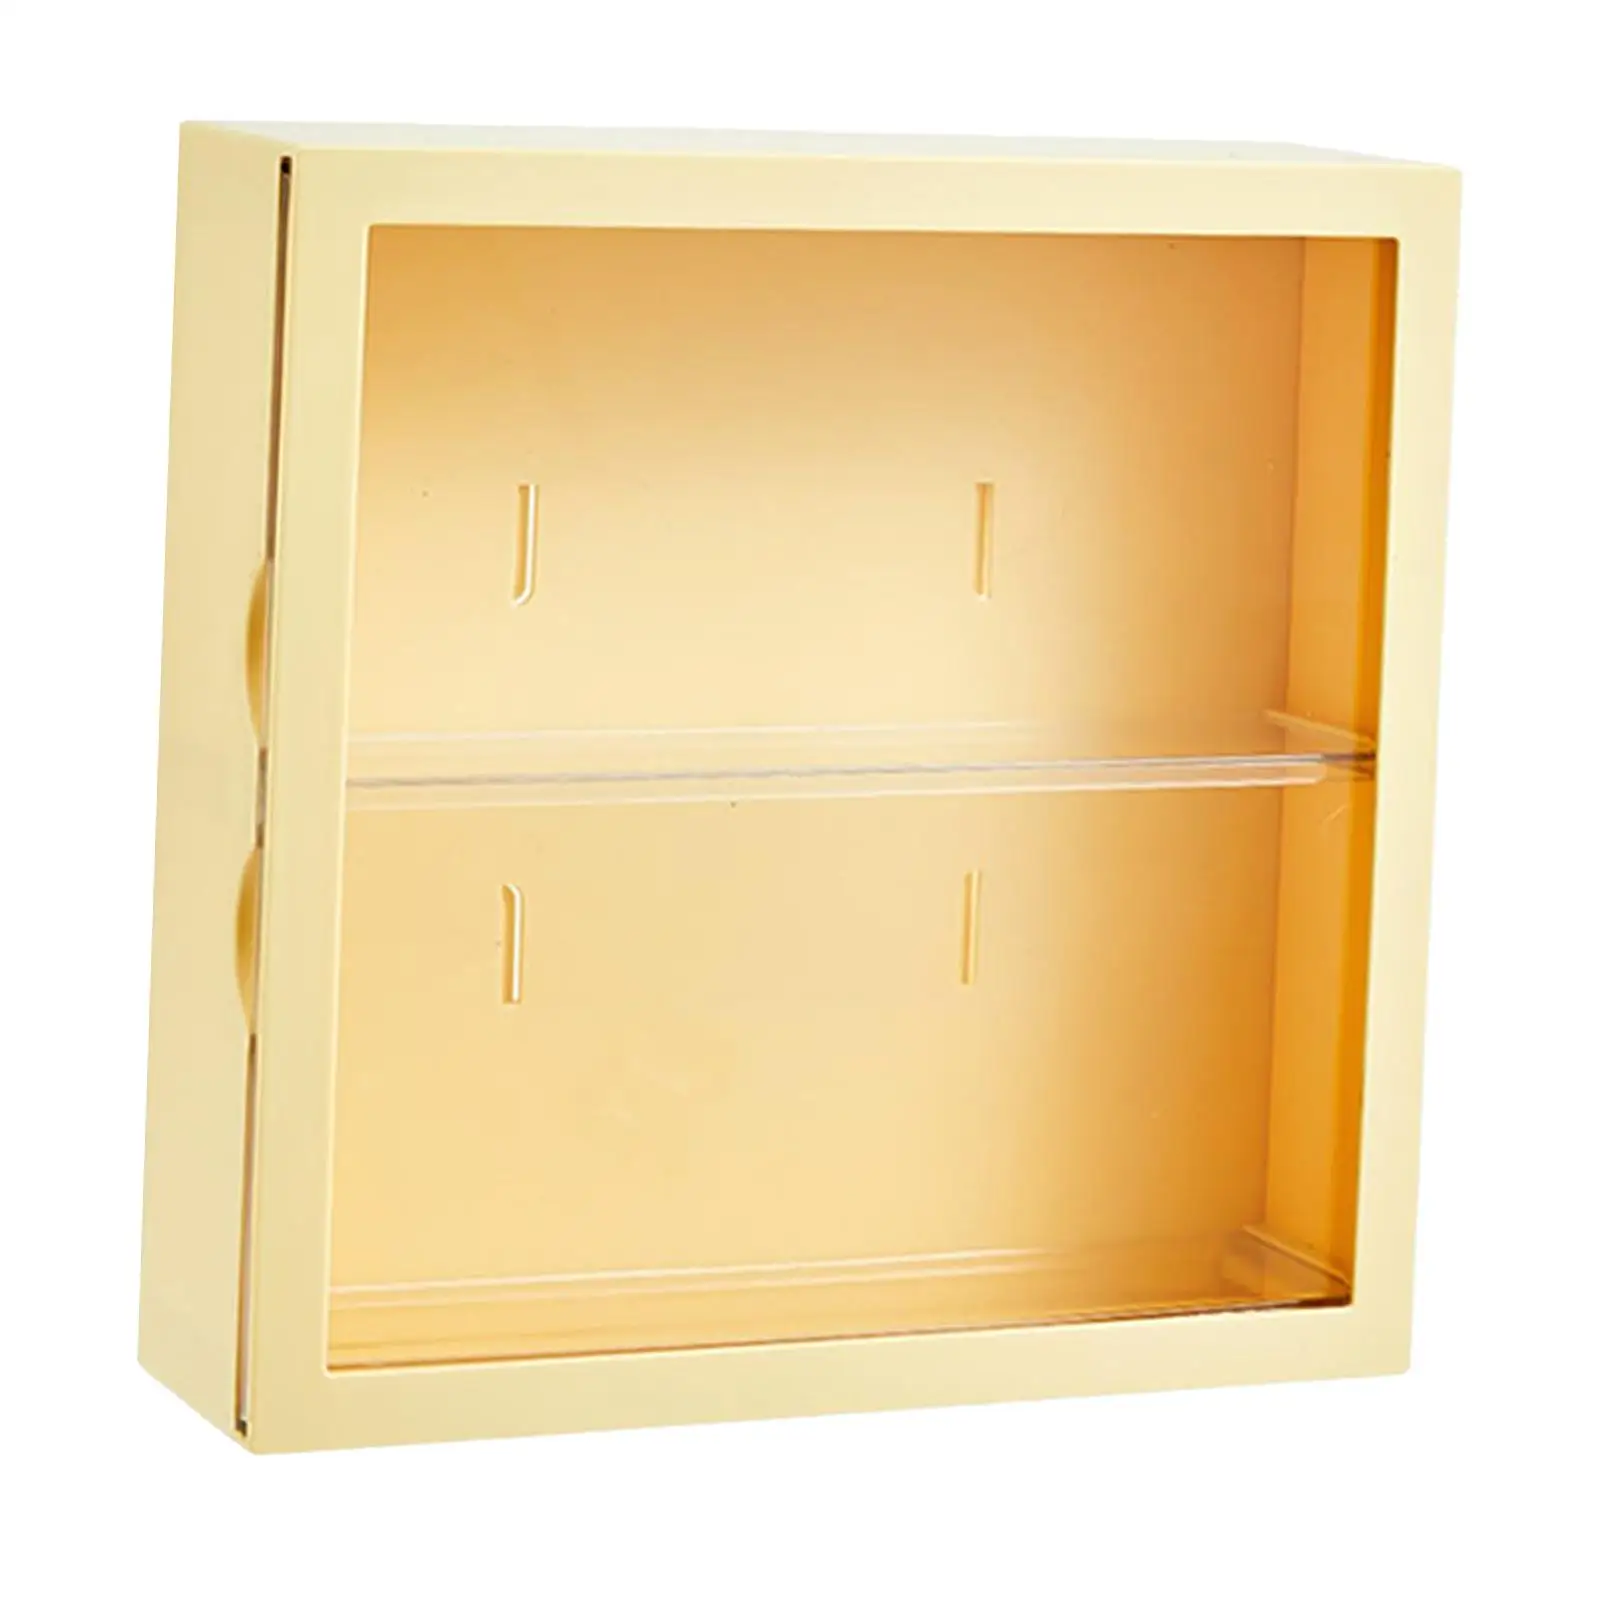 2 Layer Wall Mounted Display Box Countertop Cabinet Dustproof Protection Showcase Storage Box Clear Display Case for Toy